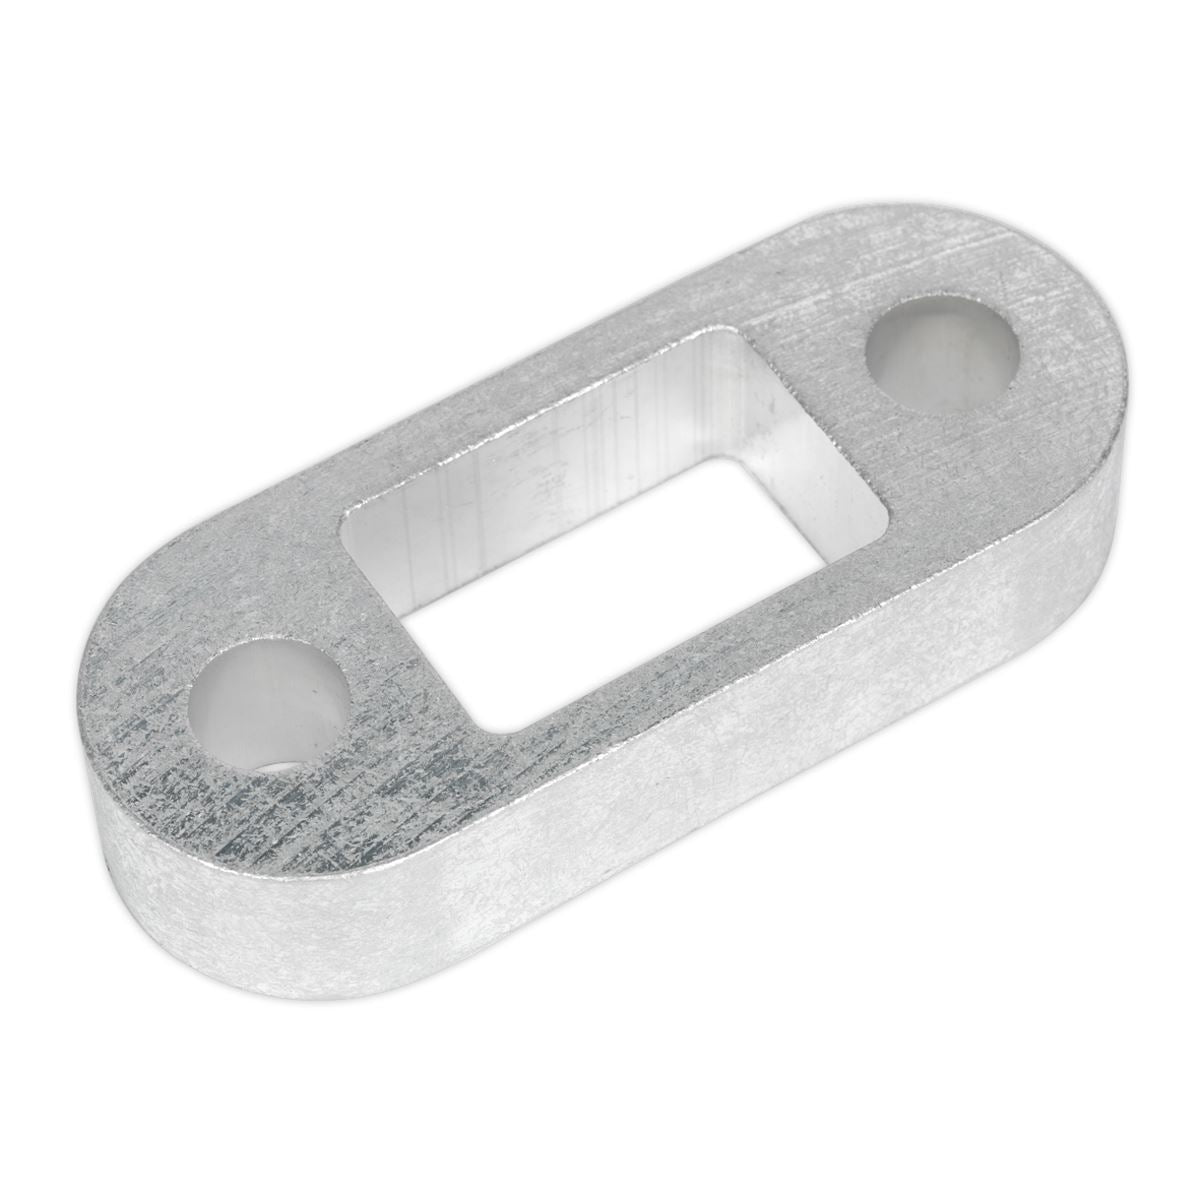 Sealey Tow-Ball Spacer Block 25mm